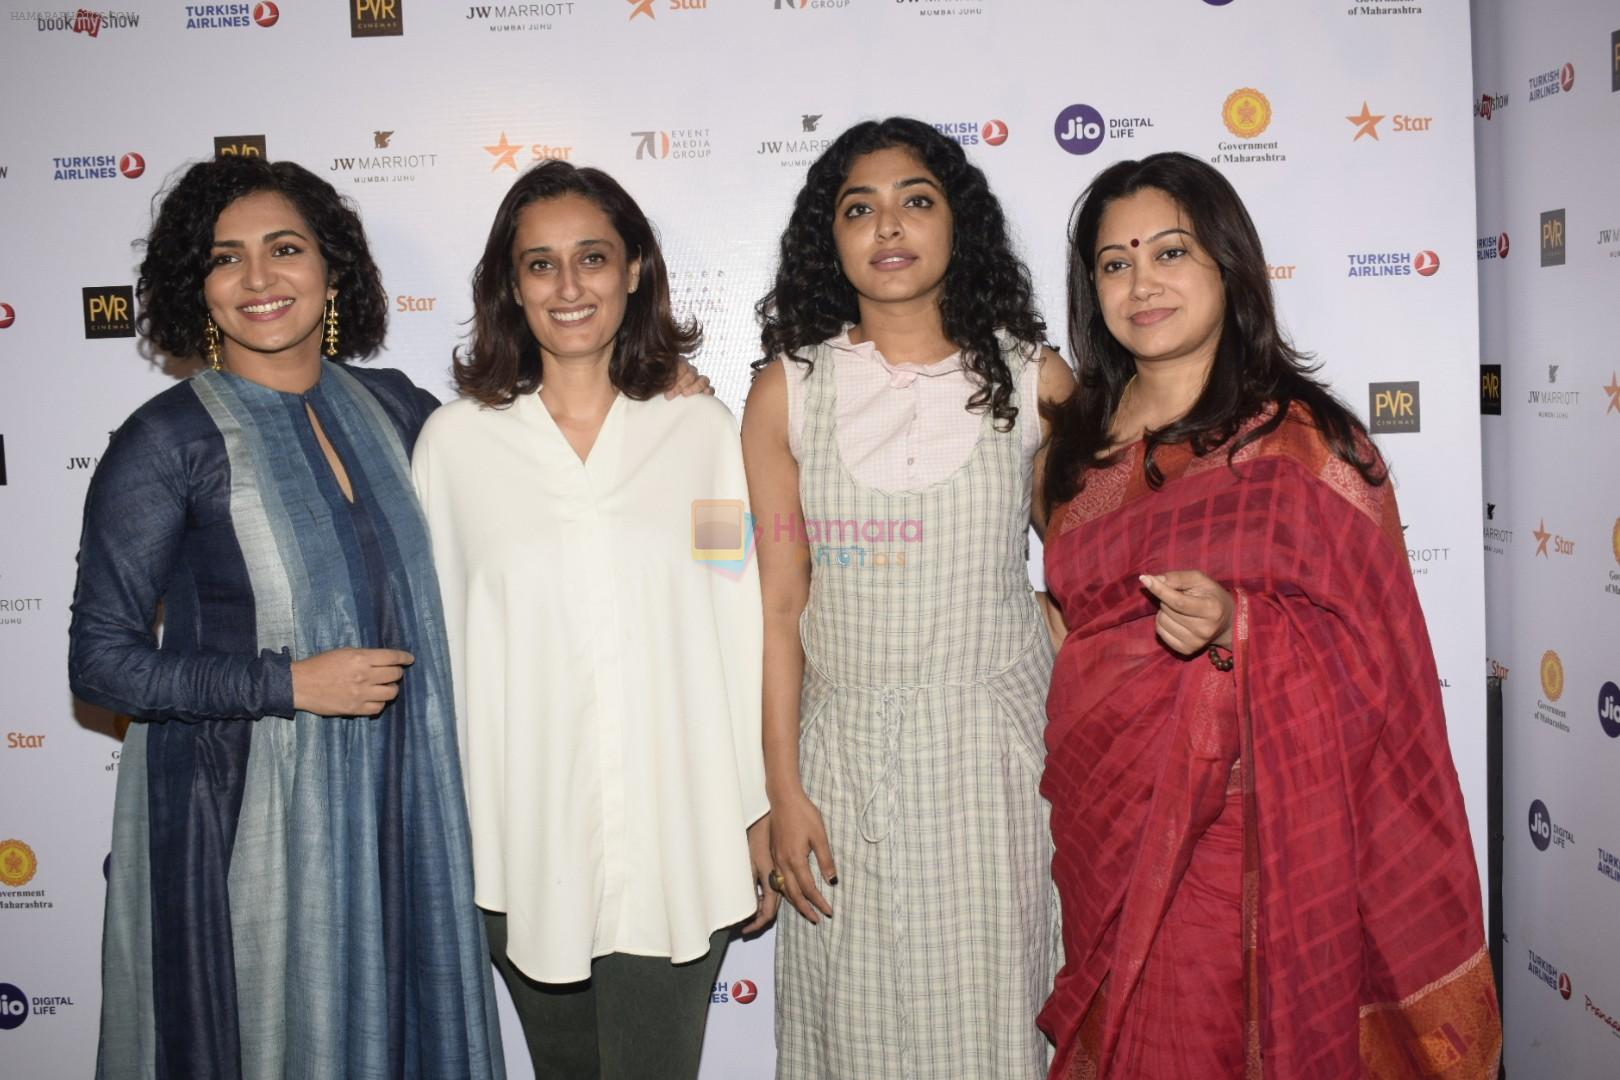 at Mami #Metoo session at pvr ecx in andheri on 30th Oct 2018